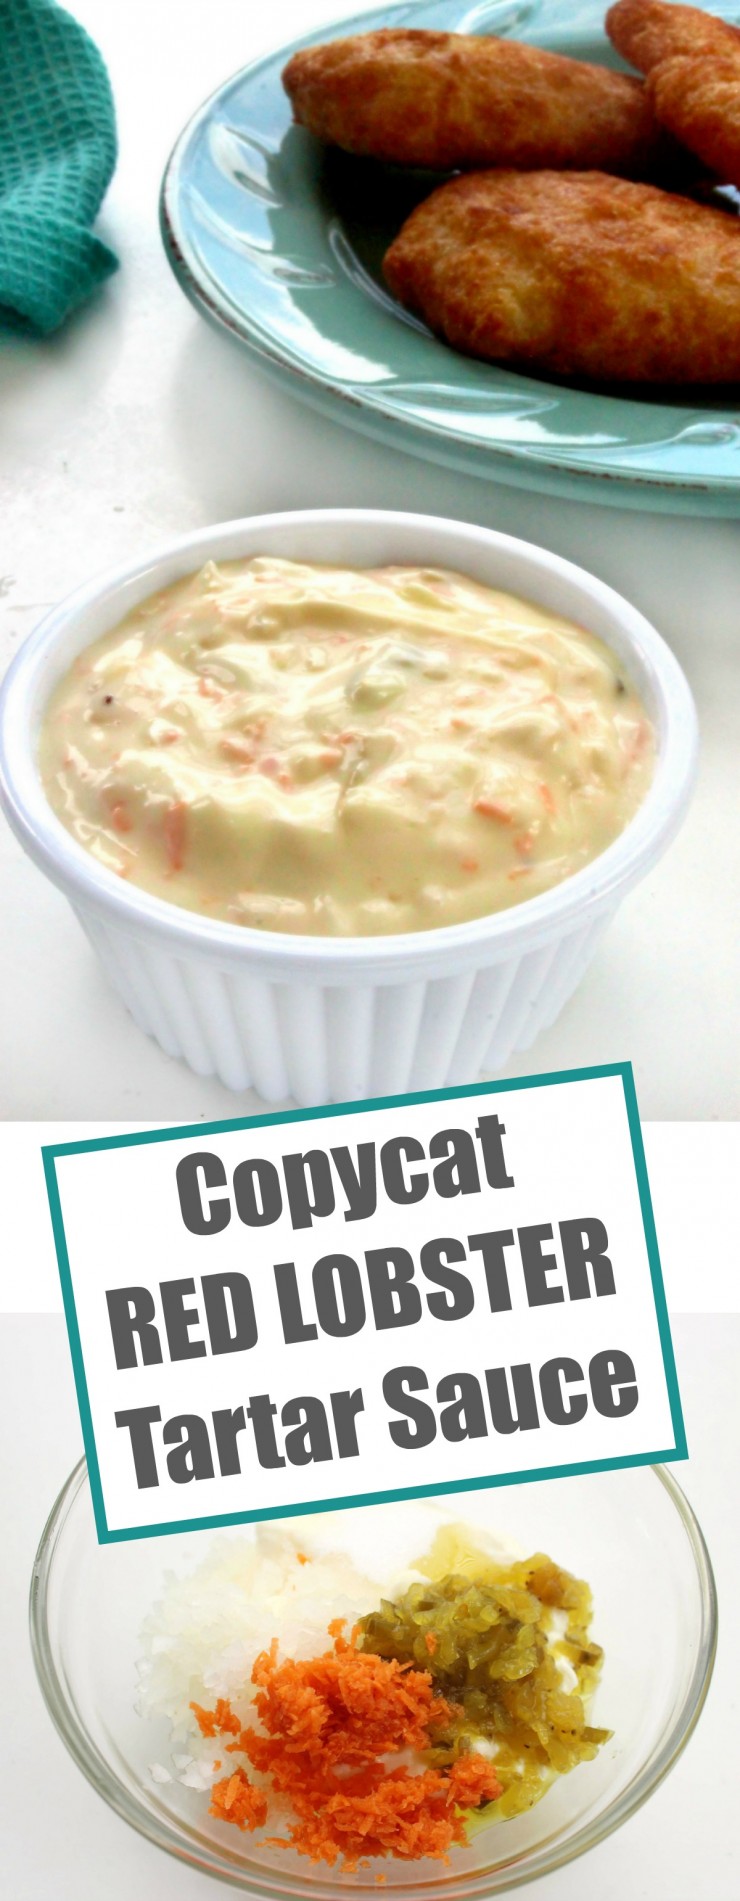 Homemade Tartar Sauce is easy to make but what really sets this Copycat Red Lobster Tartar Sauce apart from the rest is that, just like the real thing, it has a touch of sweetness to it. 